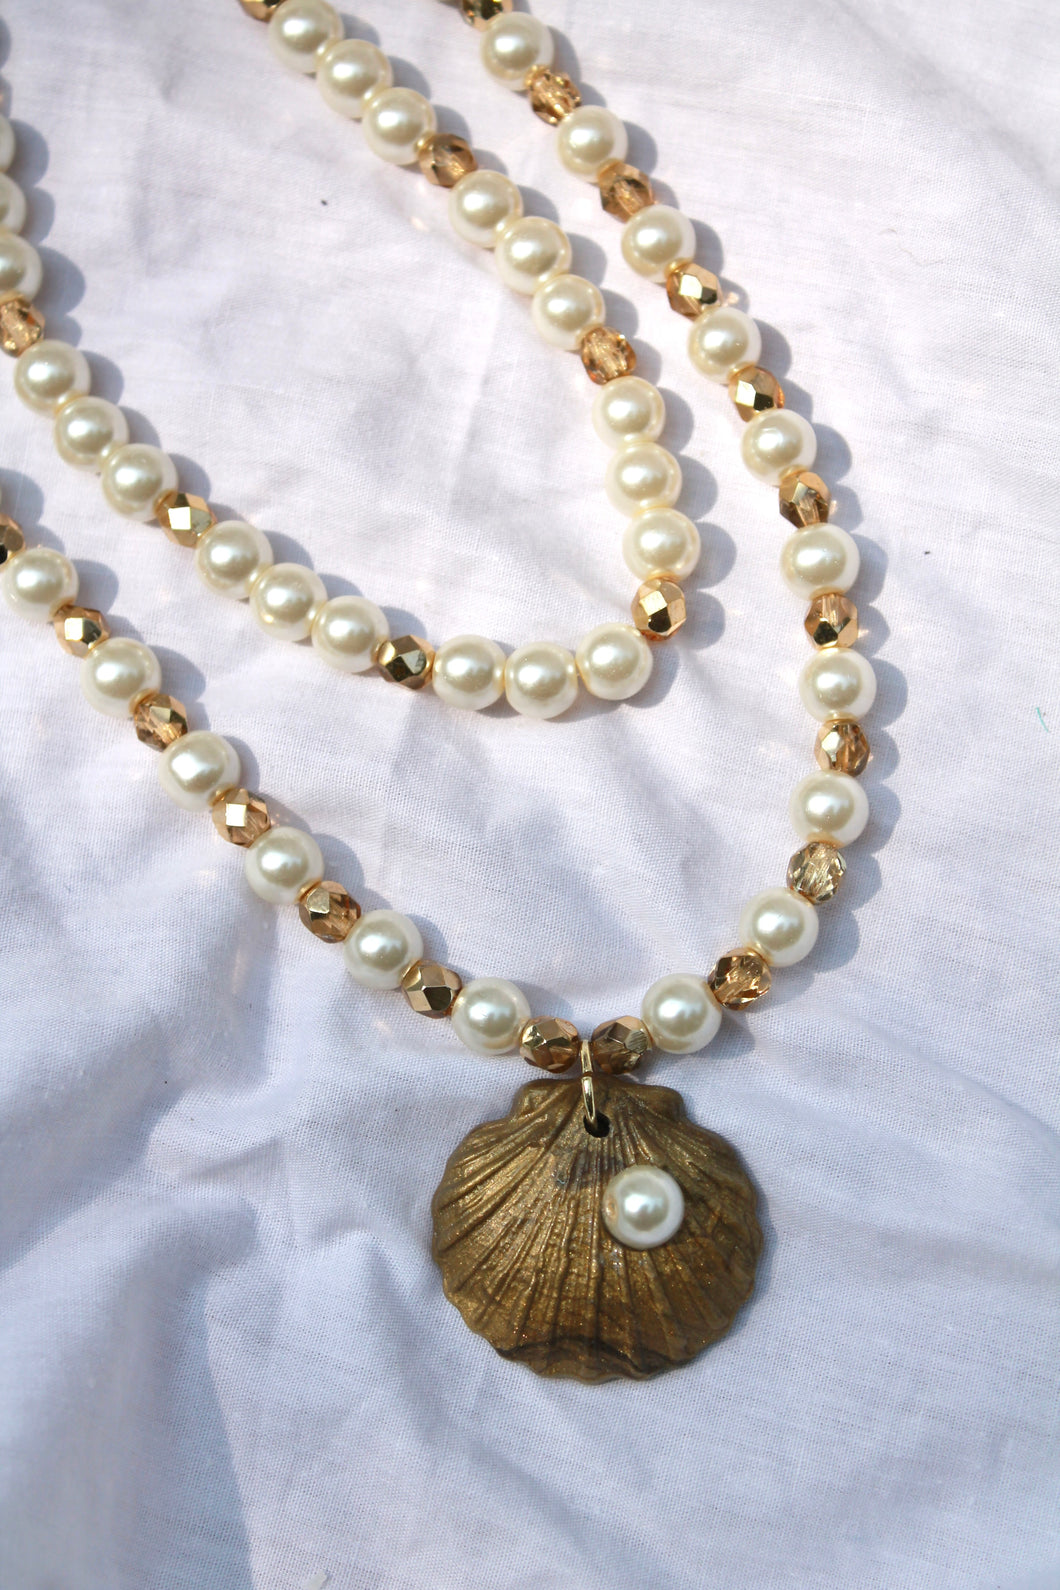 Gold and Pearl beaded Necklace with Gold Seashell